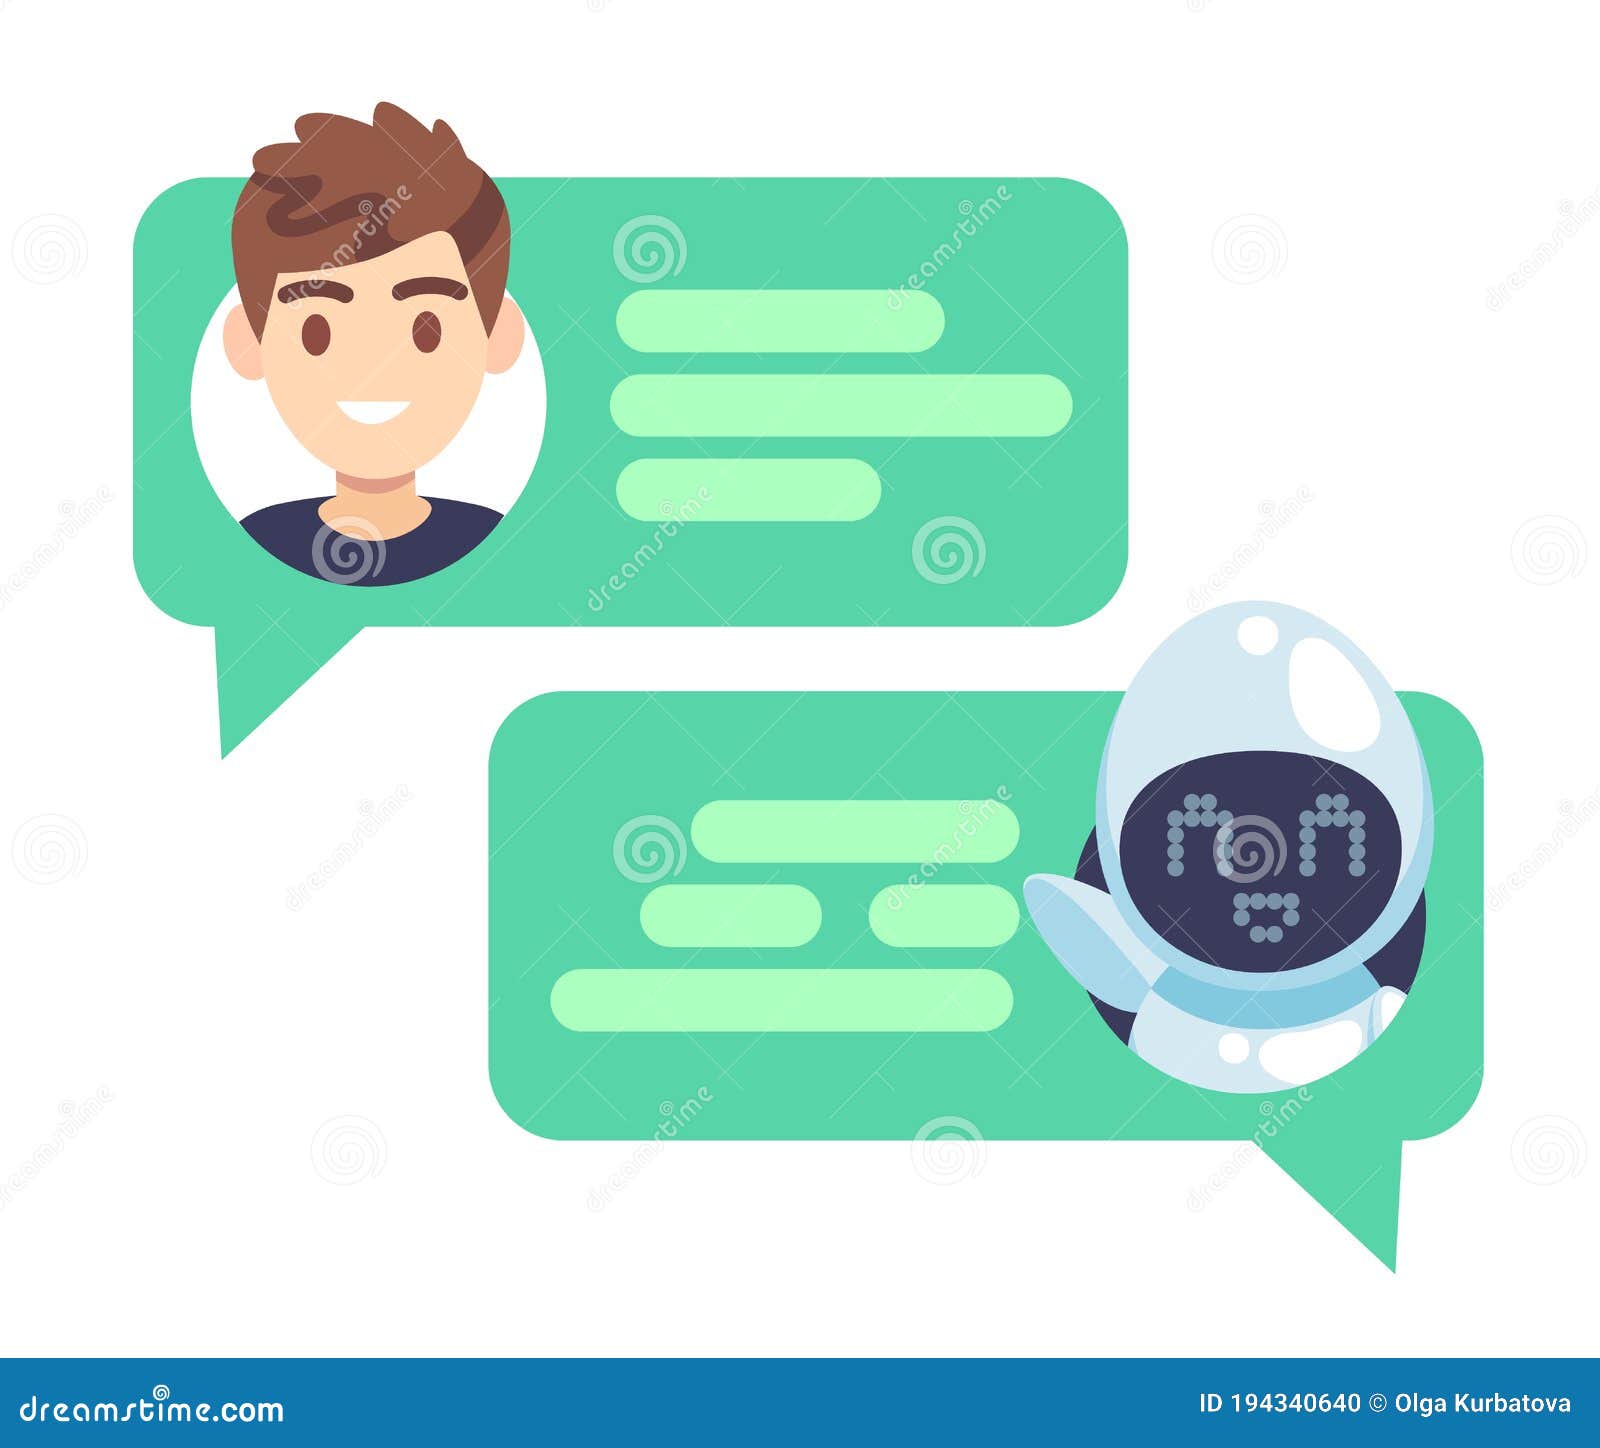 chatbot character. online helper chatting with man, virtual robot answers questions by customer, device screenshot with